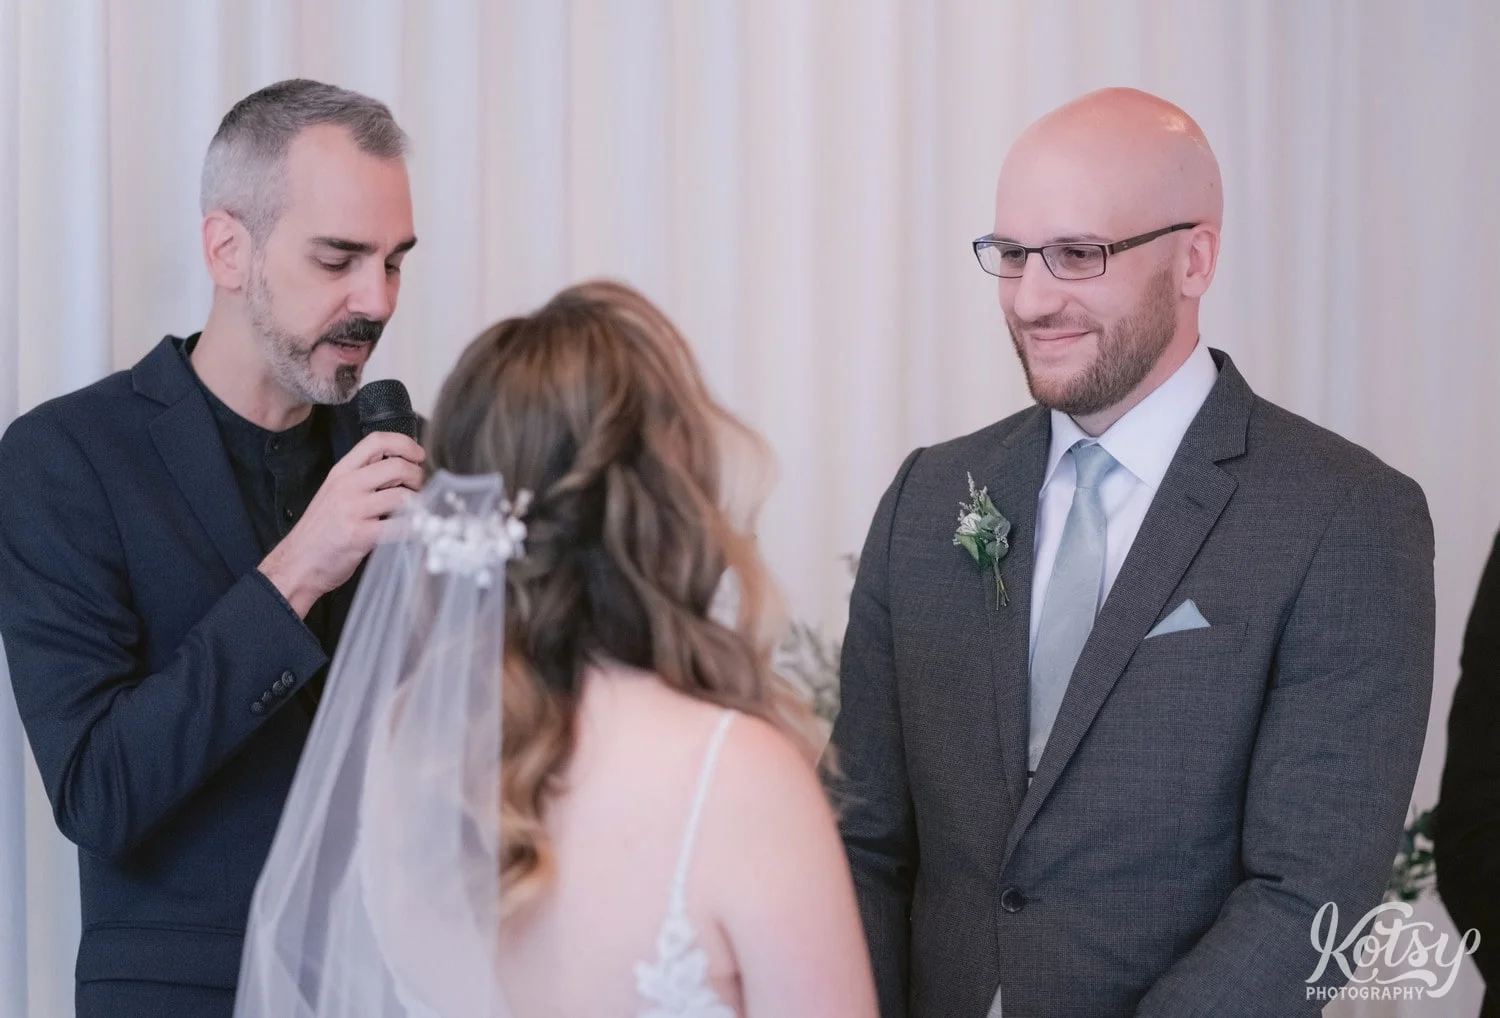 A groom in a gray suit and green tie smiles while looking at his bride as an officiant speaks into a microphone at the altar during there Second Floor Events wedding ceremony in Toronto, Canada